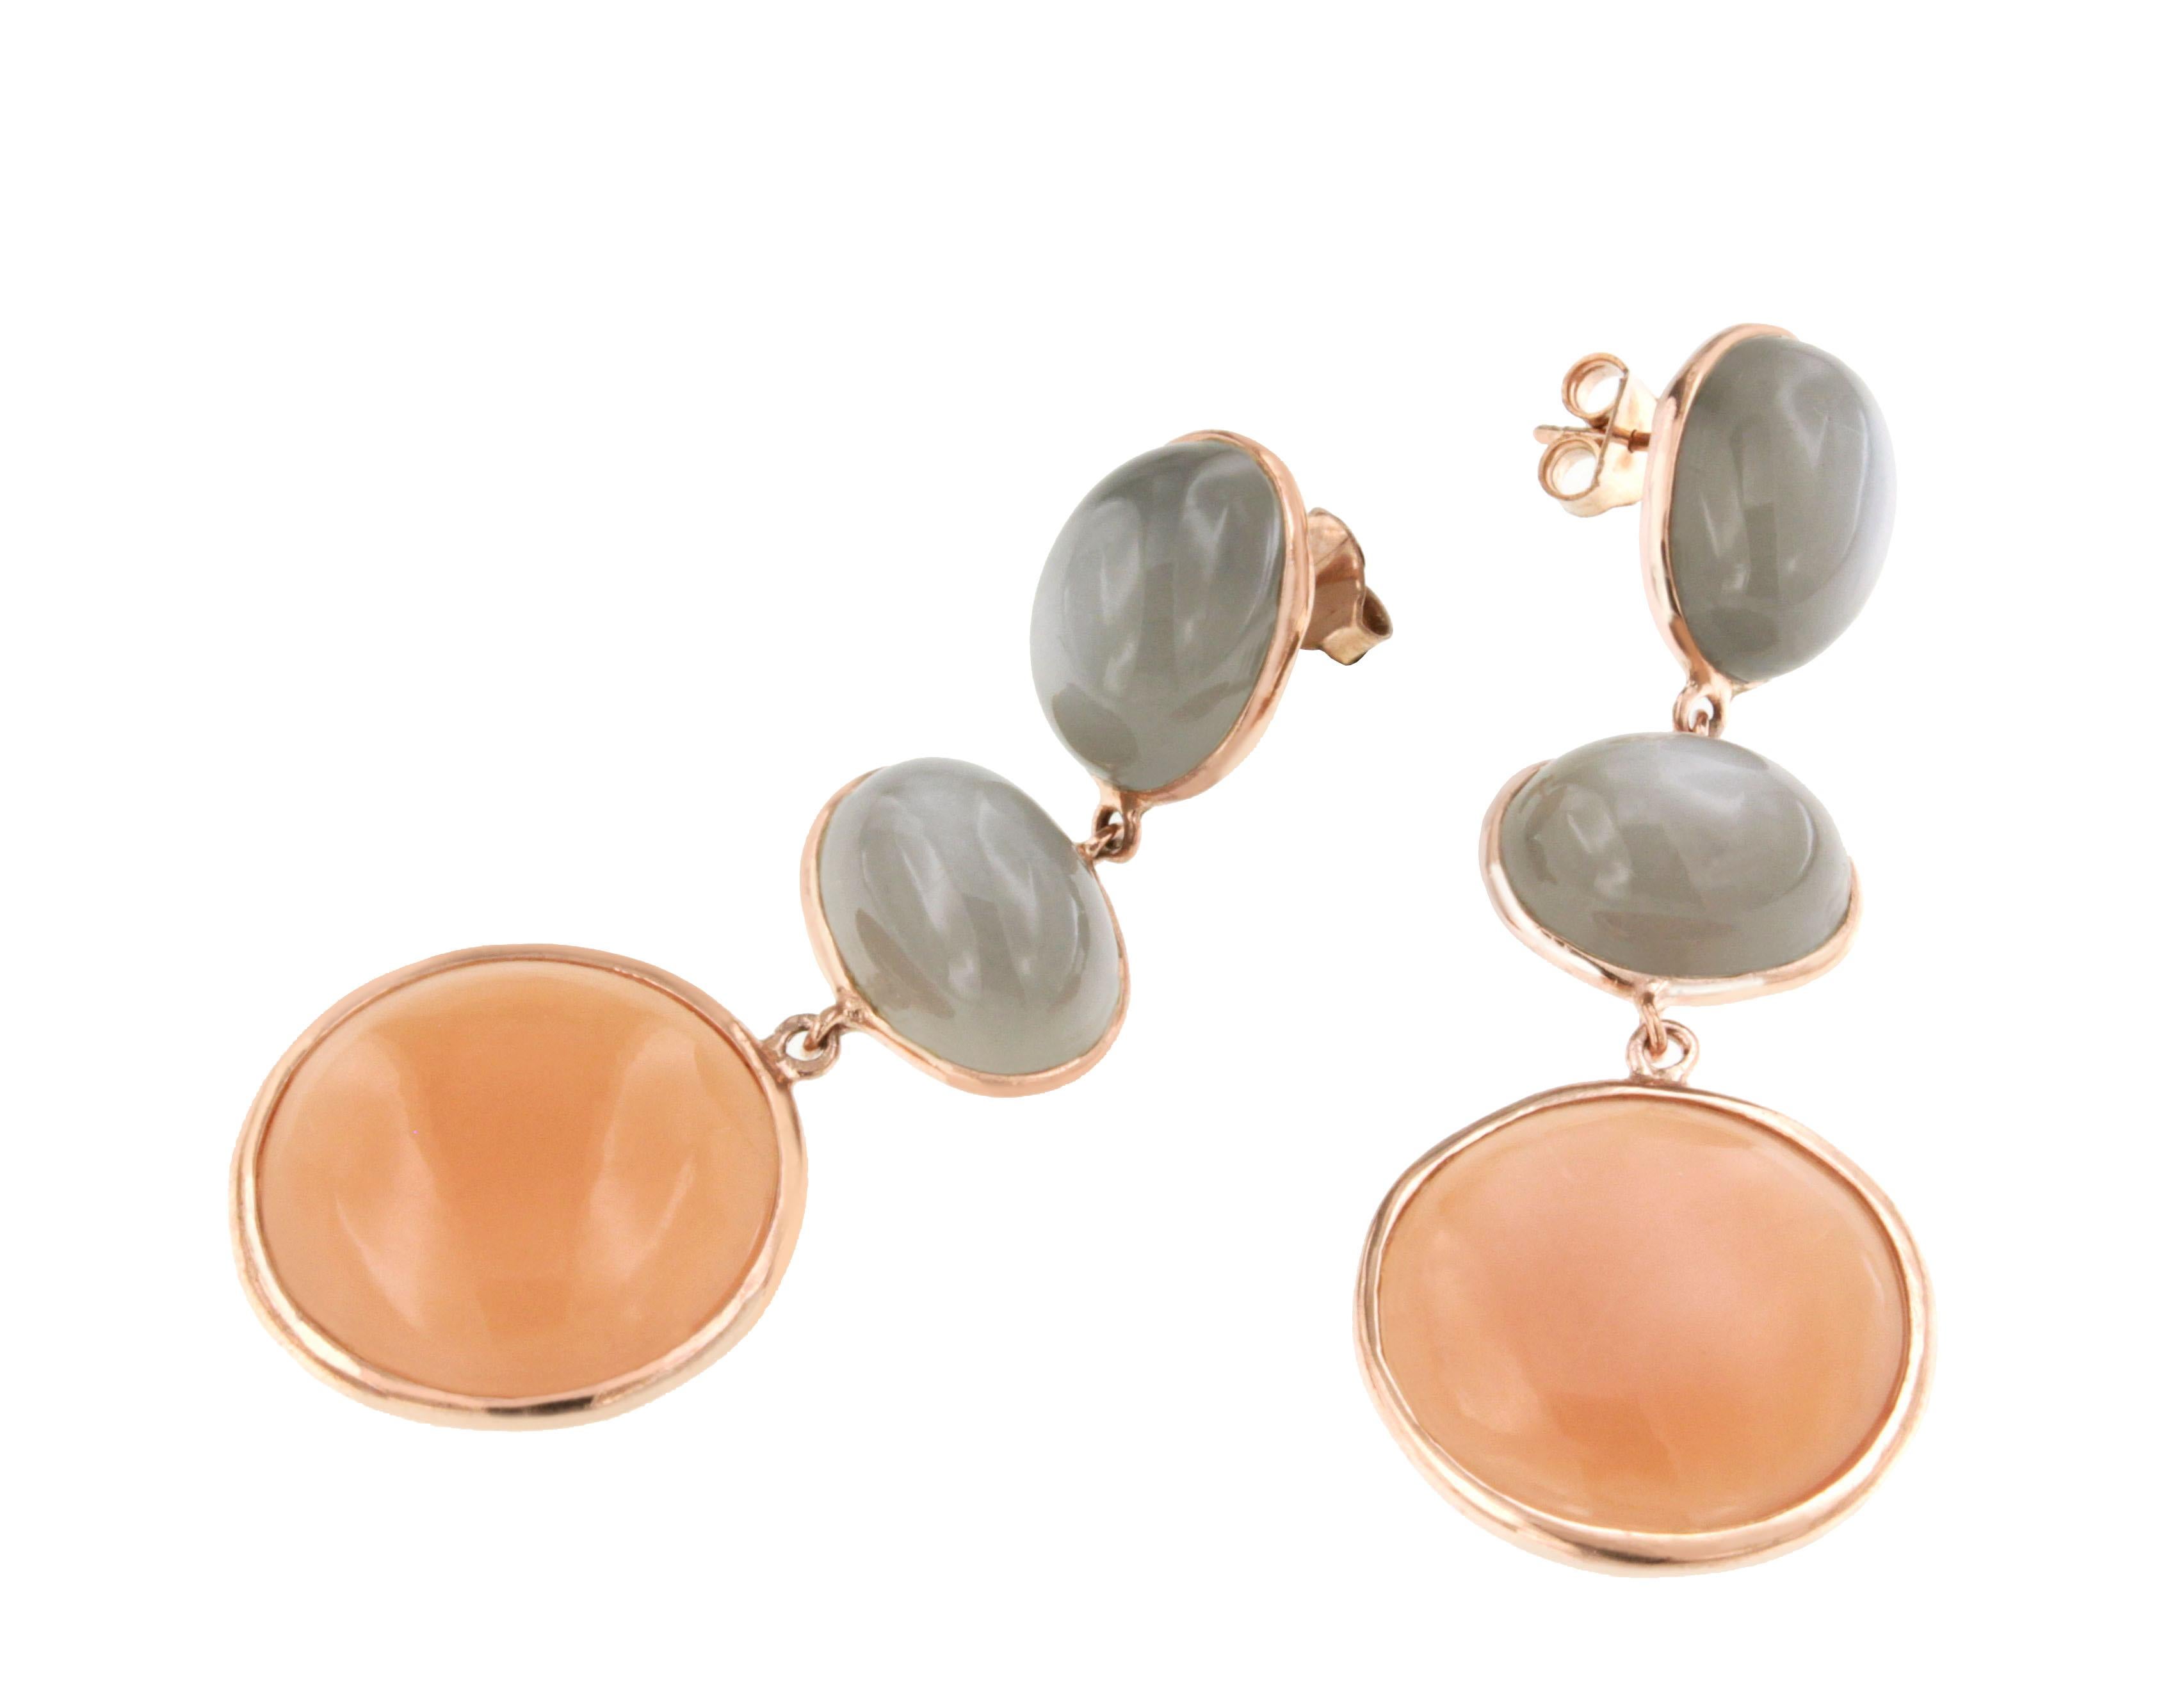 Earrings in rose gold 9 Karat with Grey Moonstone (oval cabochon cut, size: 10x14 mm) and Peach Moonstone (round cabochon cut, size: 20 mm)

All Stanoppi Jewelry is new and has never been previously owned or worn. Each item will arrive at your door